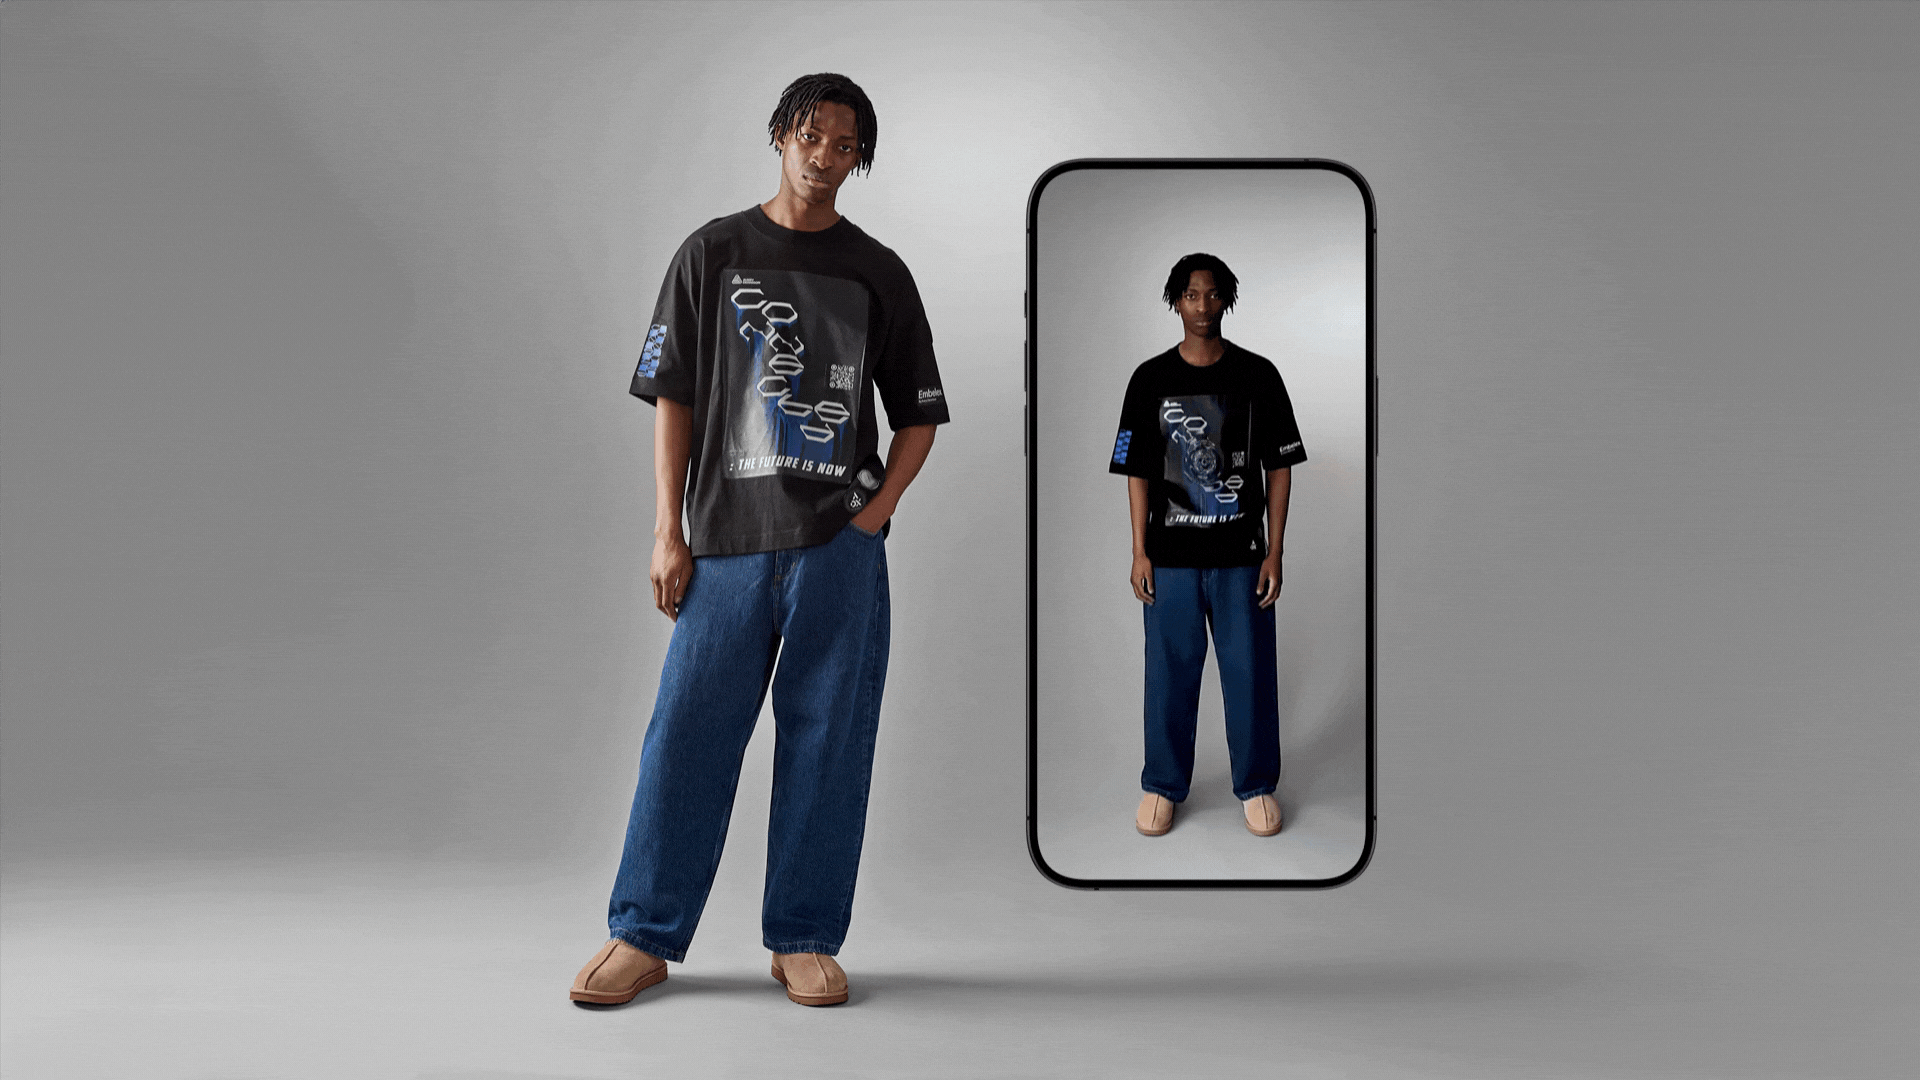 Connected fashion tee demo with augmented reality